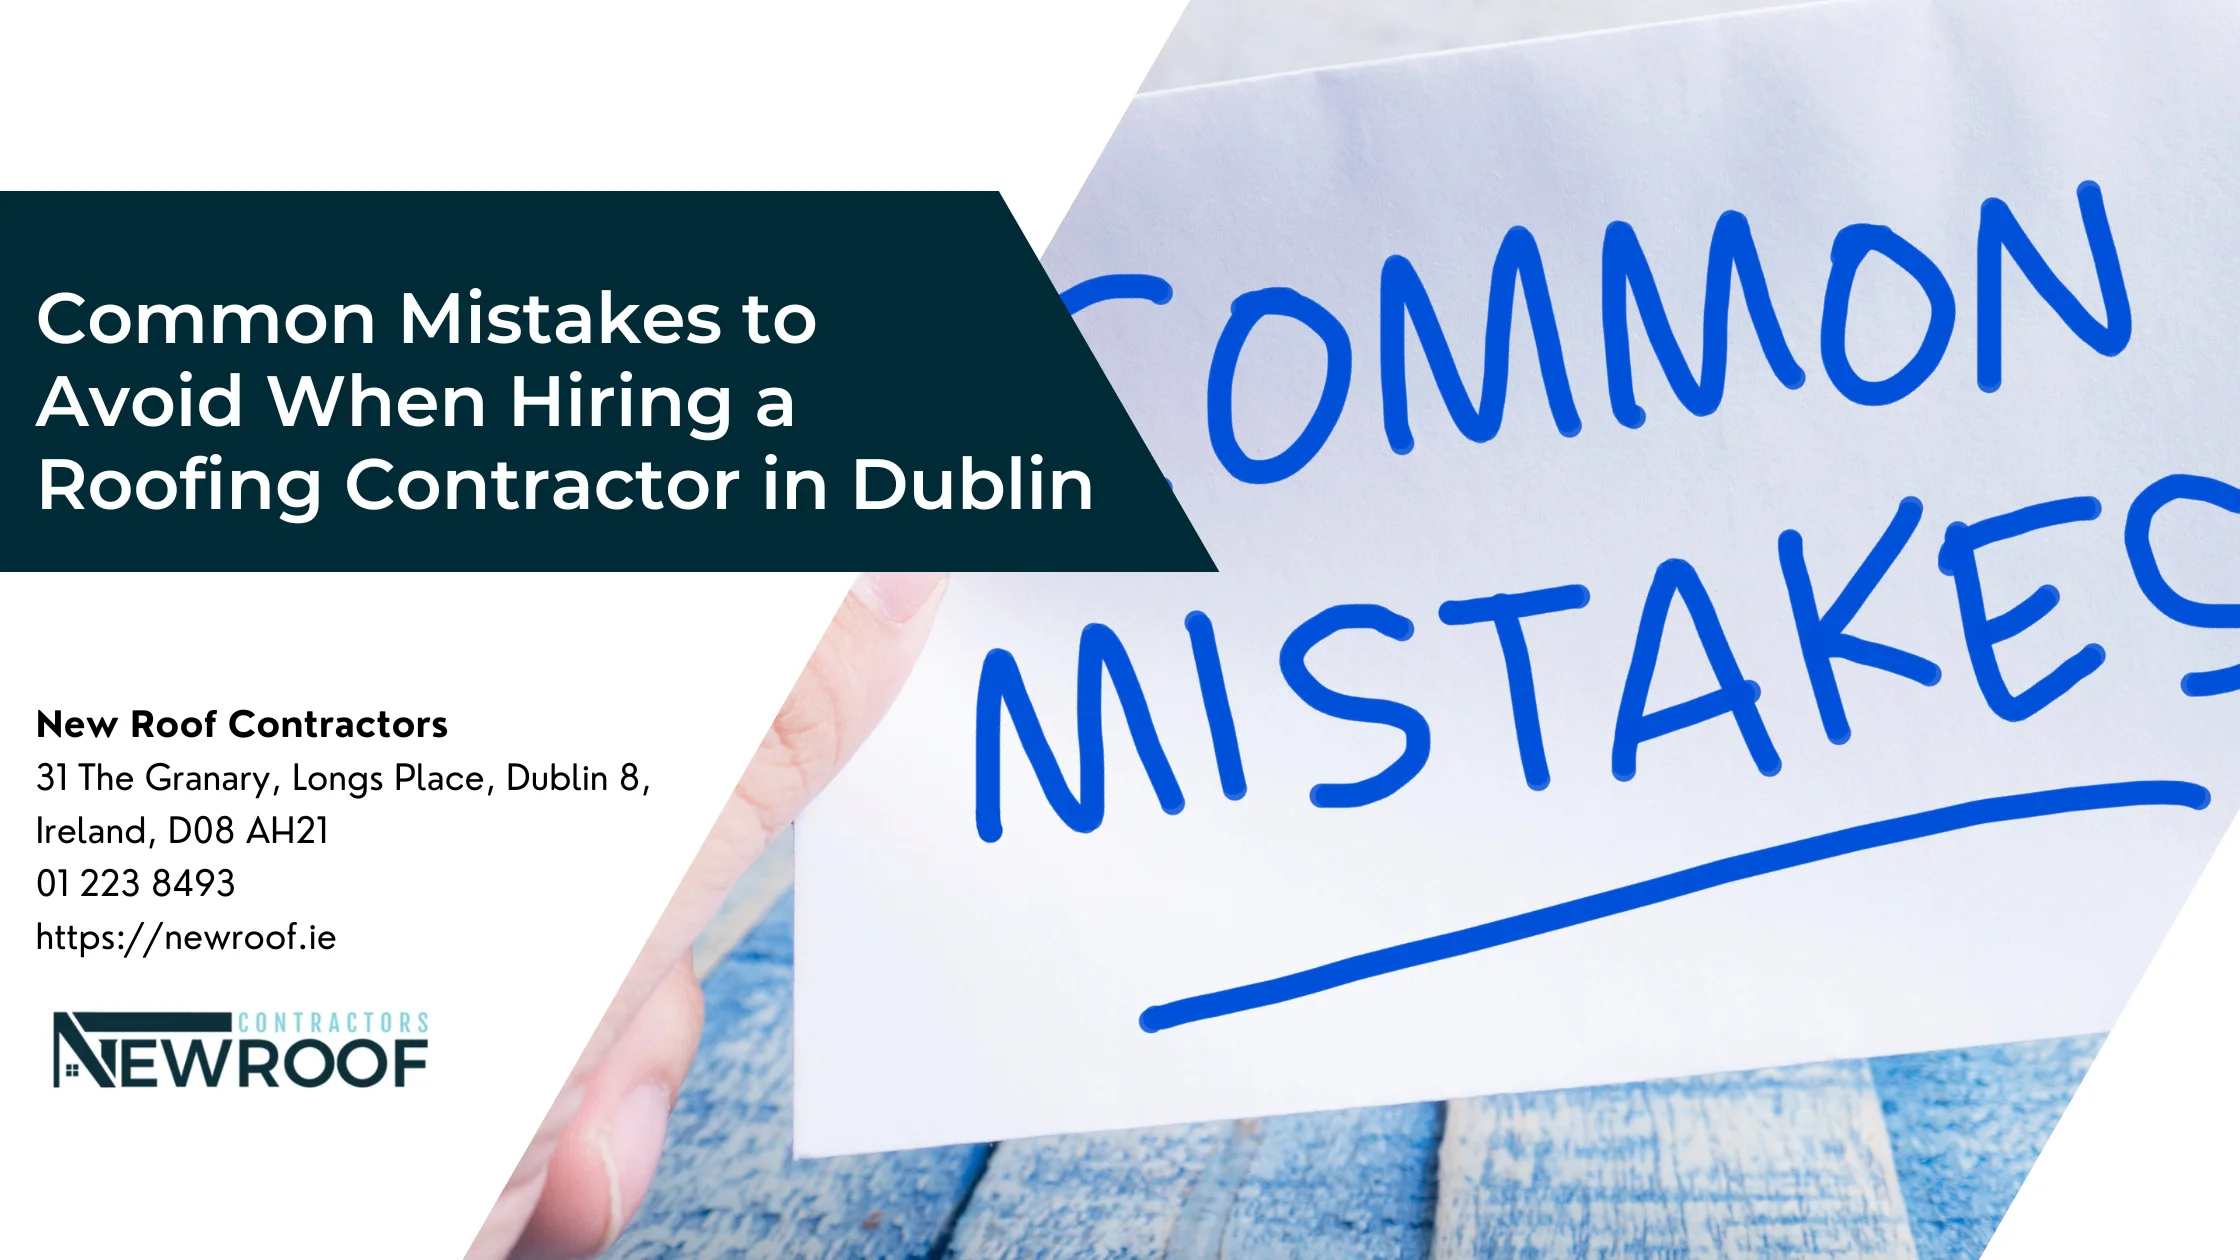 Common Mistakes to Avoid When Hiring a Roofing Contractor in Dublin